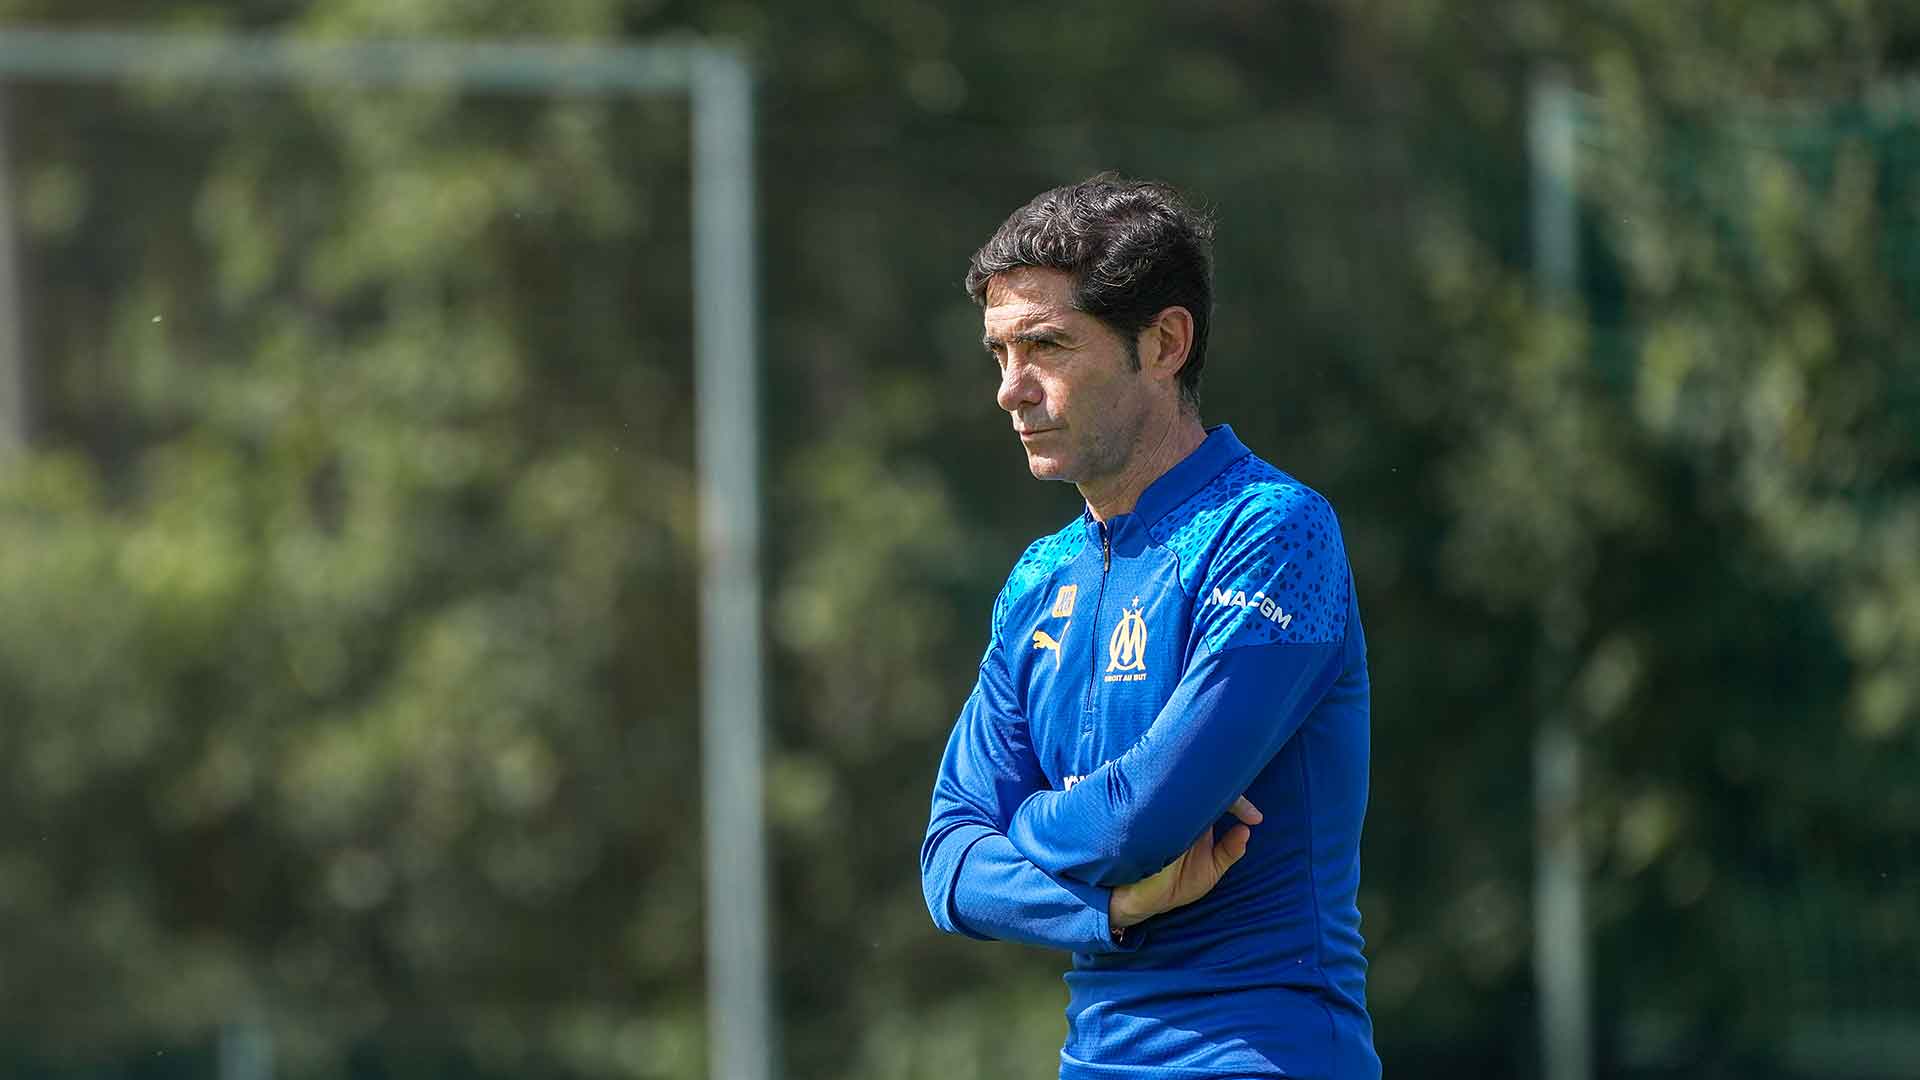 Marcelino watching a practice on the football pitch